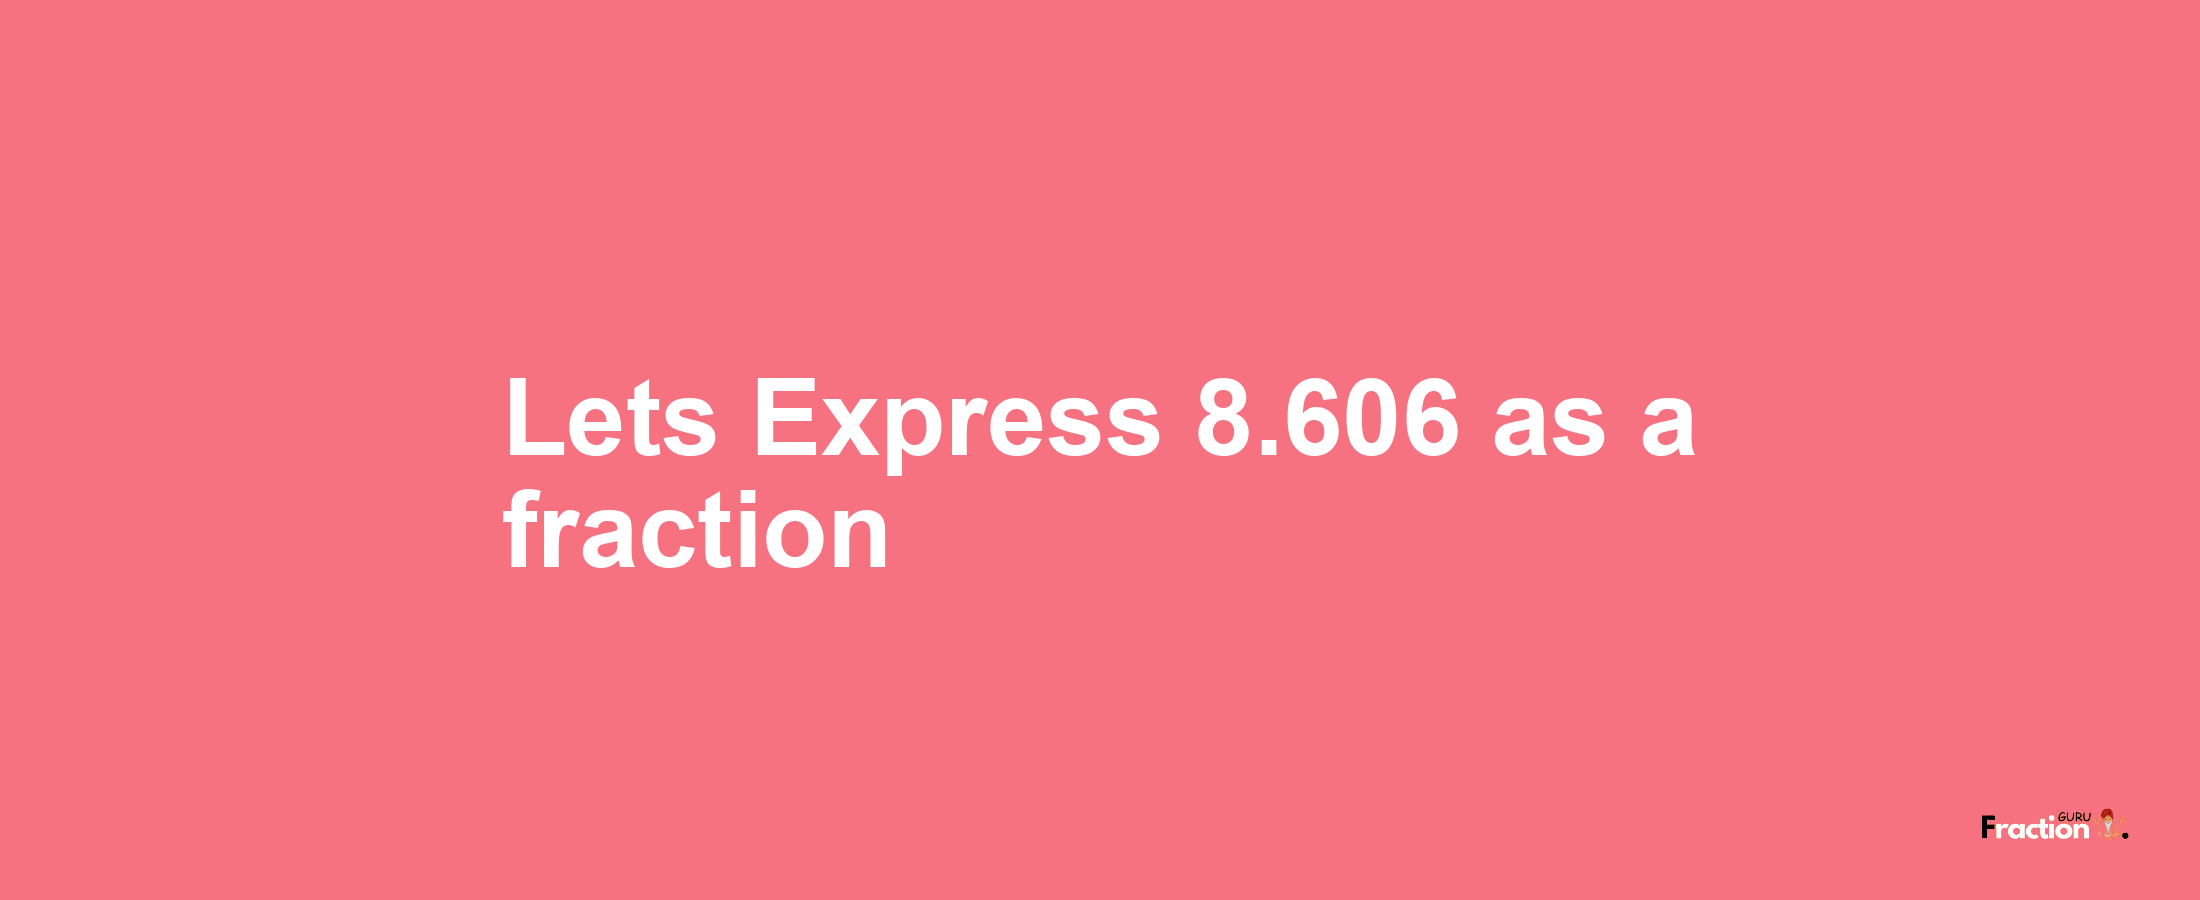 Lets Express 8.606 as afraction